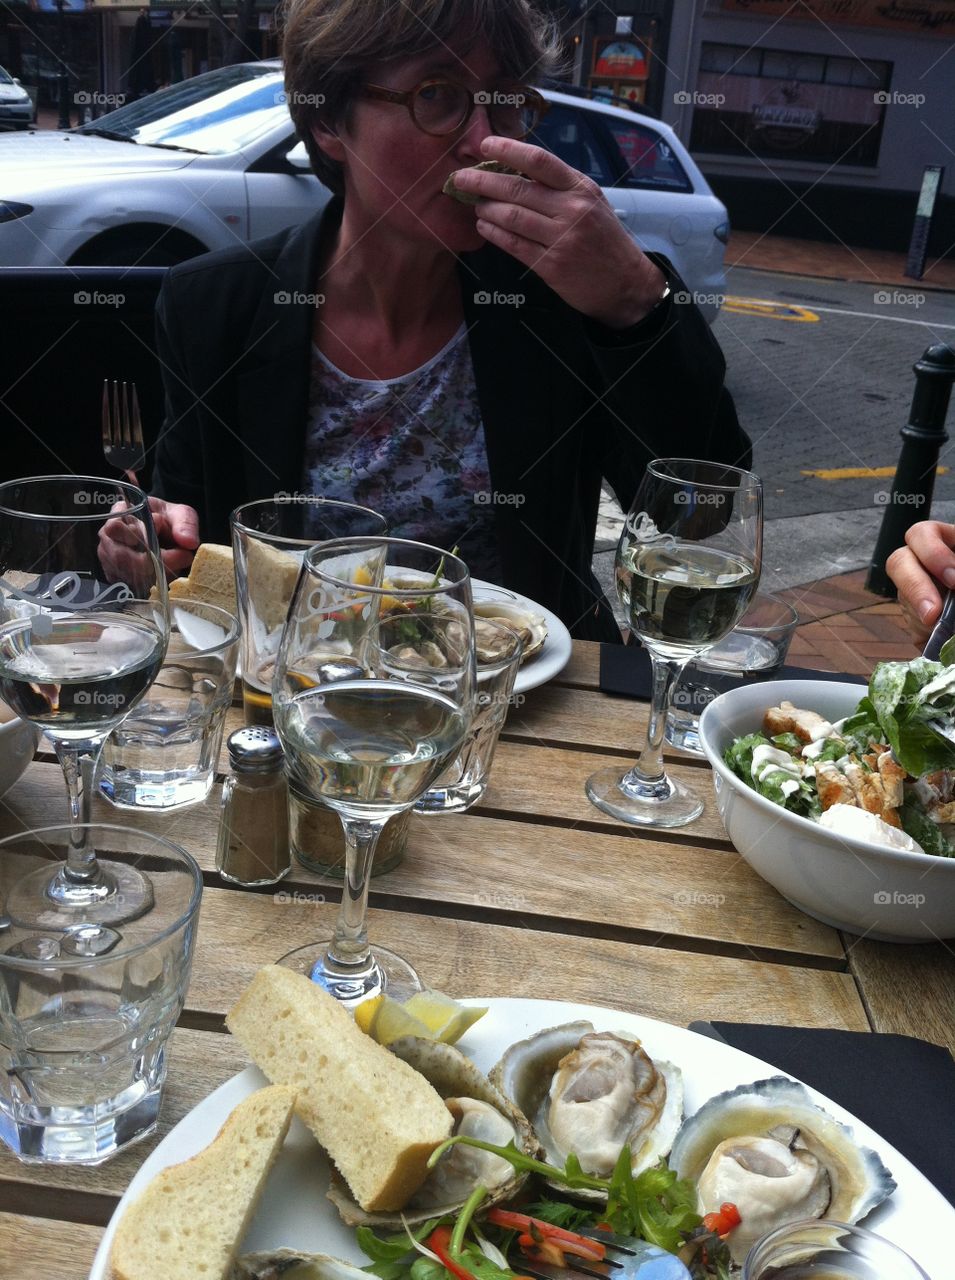 Oysters and salad. Luxury mesl with friends